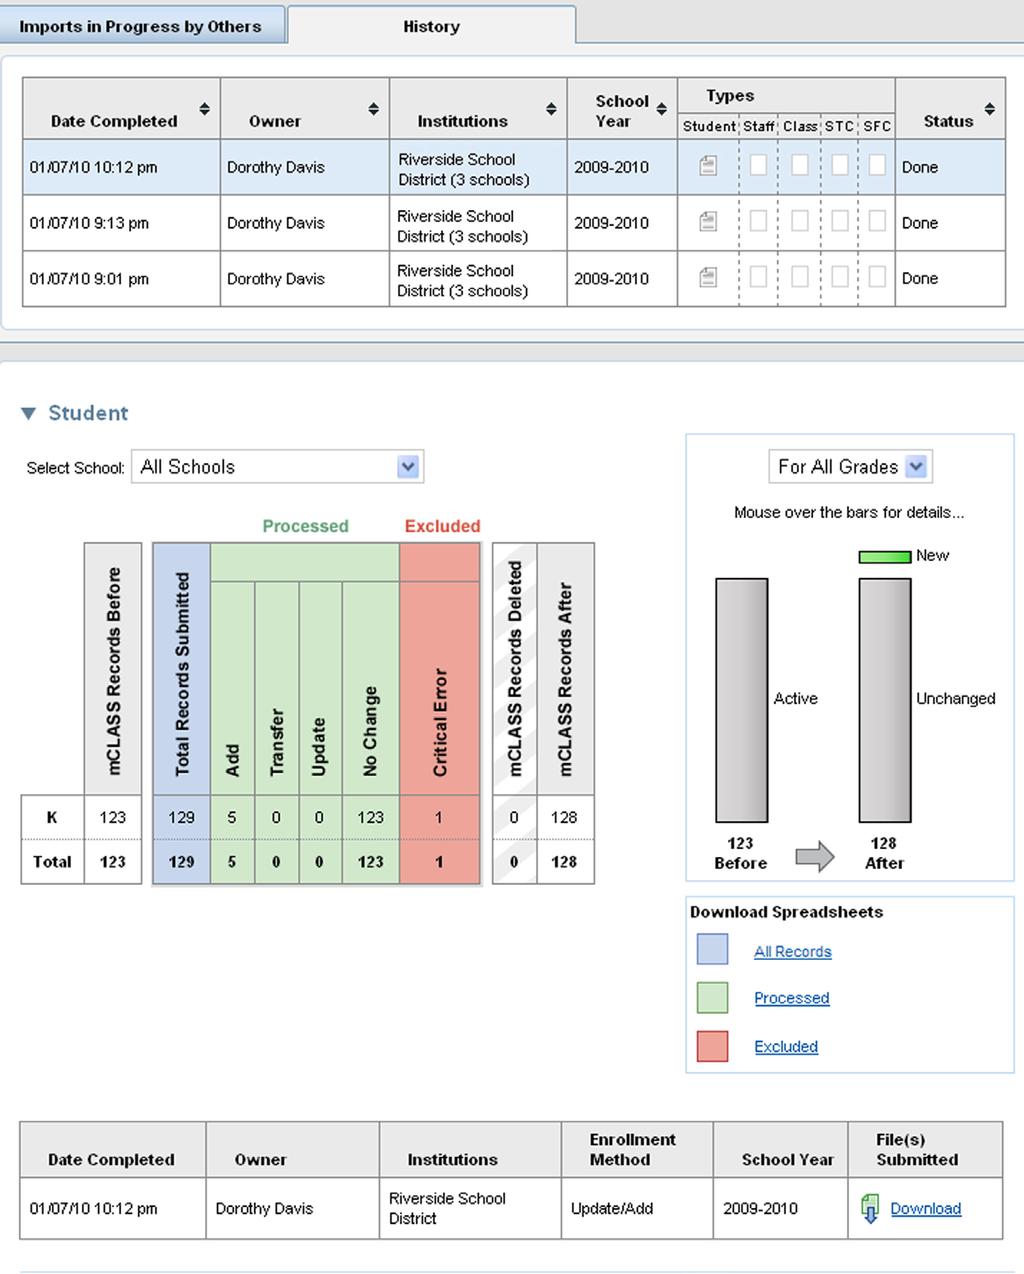 Download Spreadsheets From the History Table You may view the details of